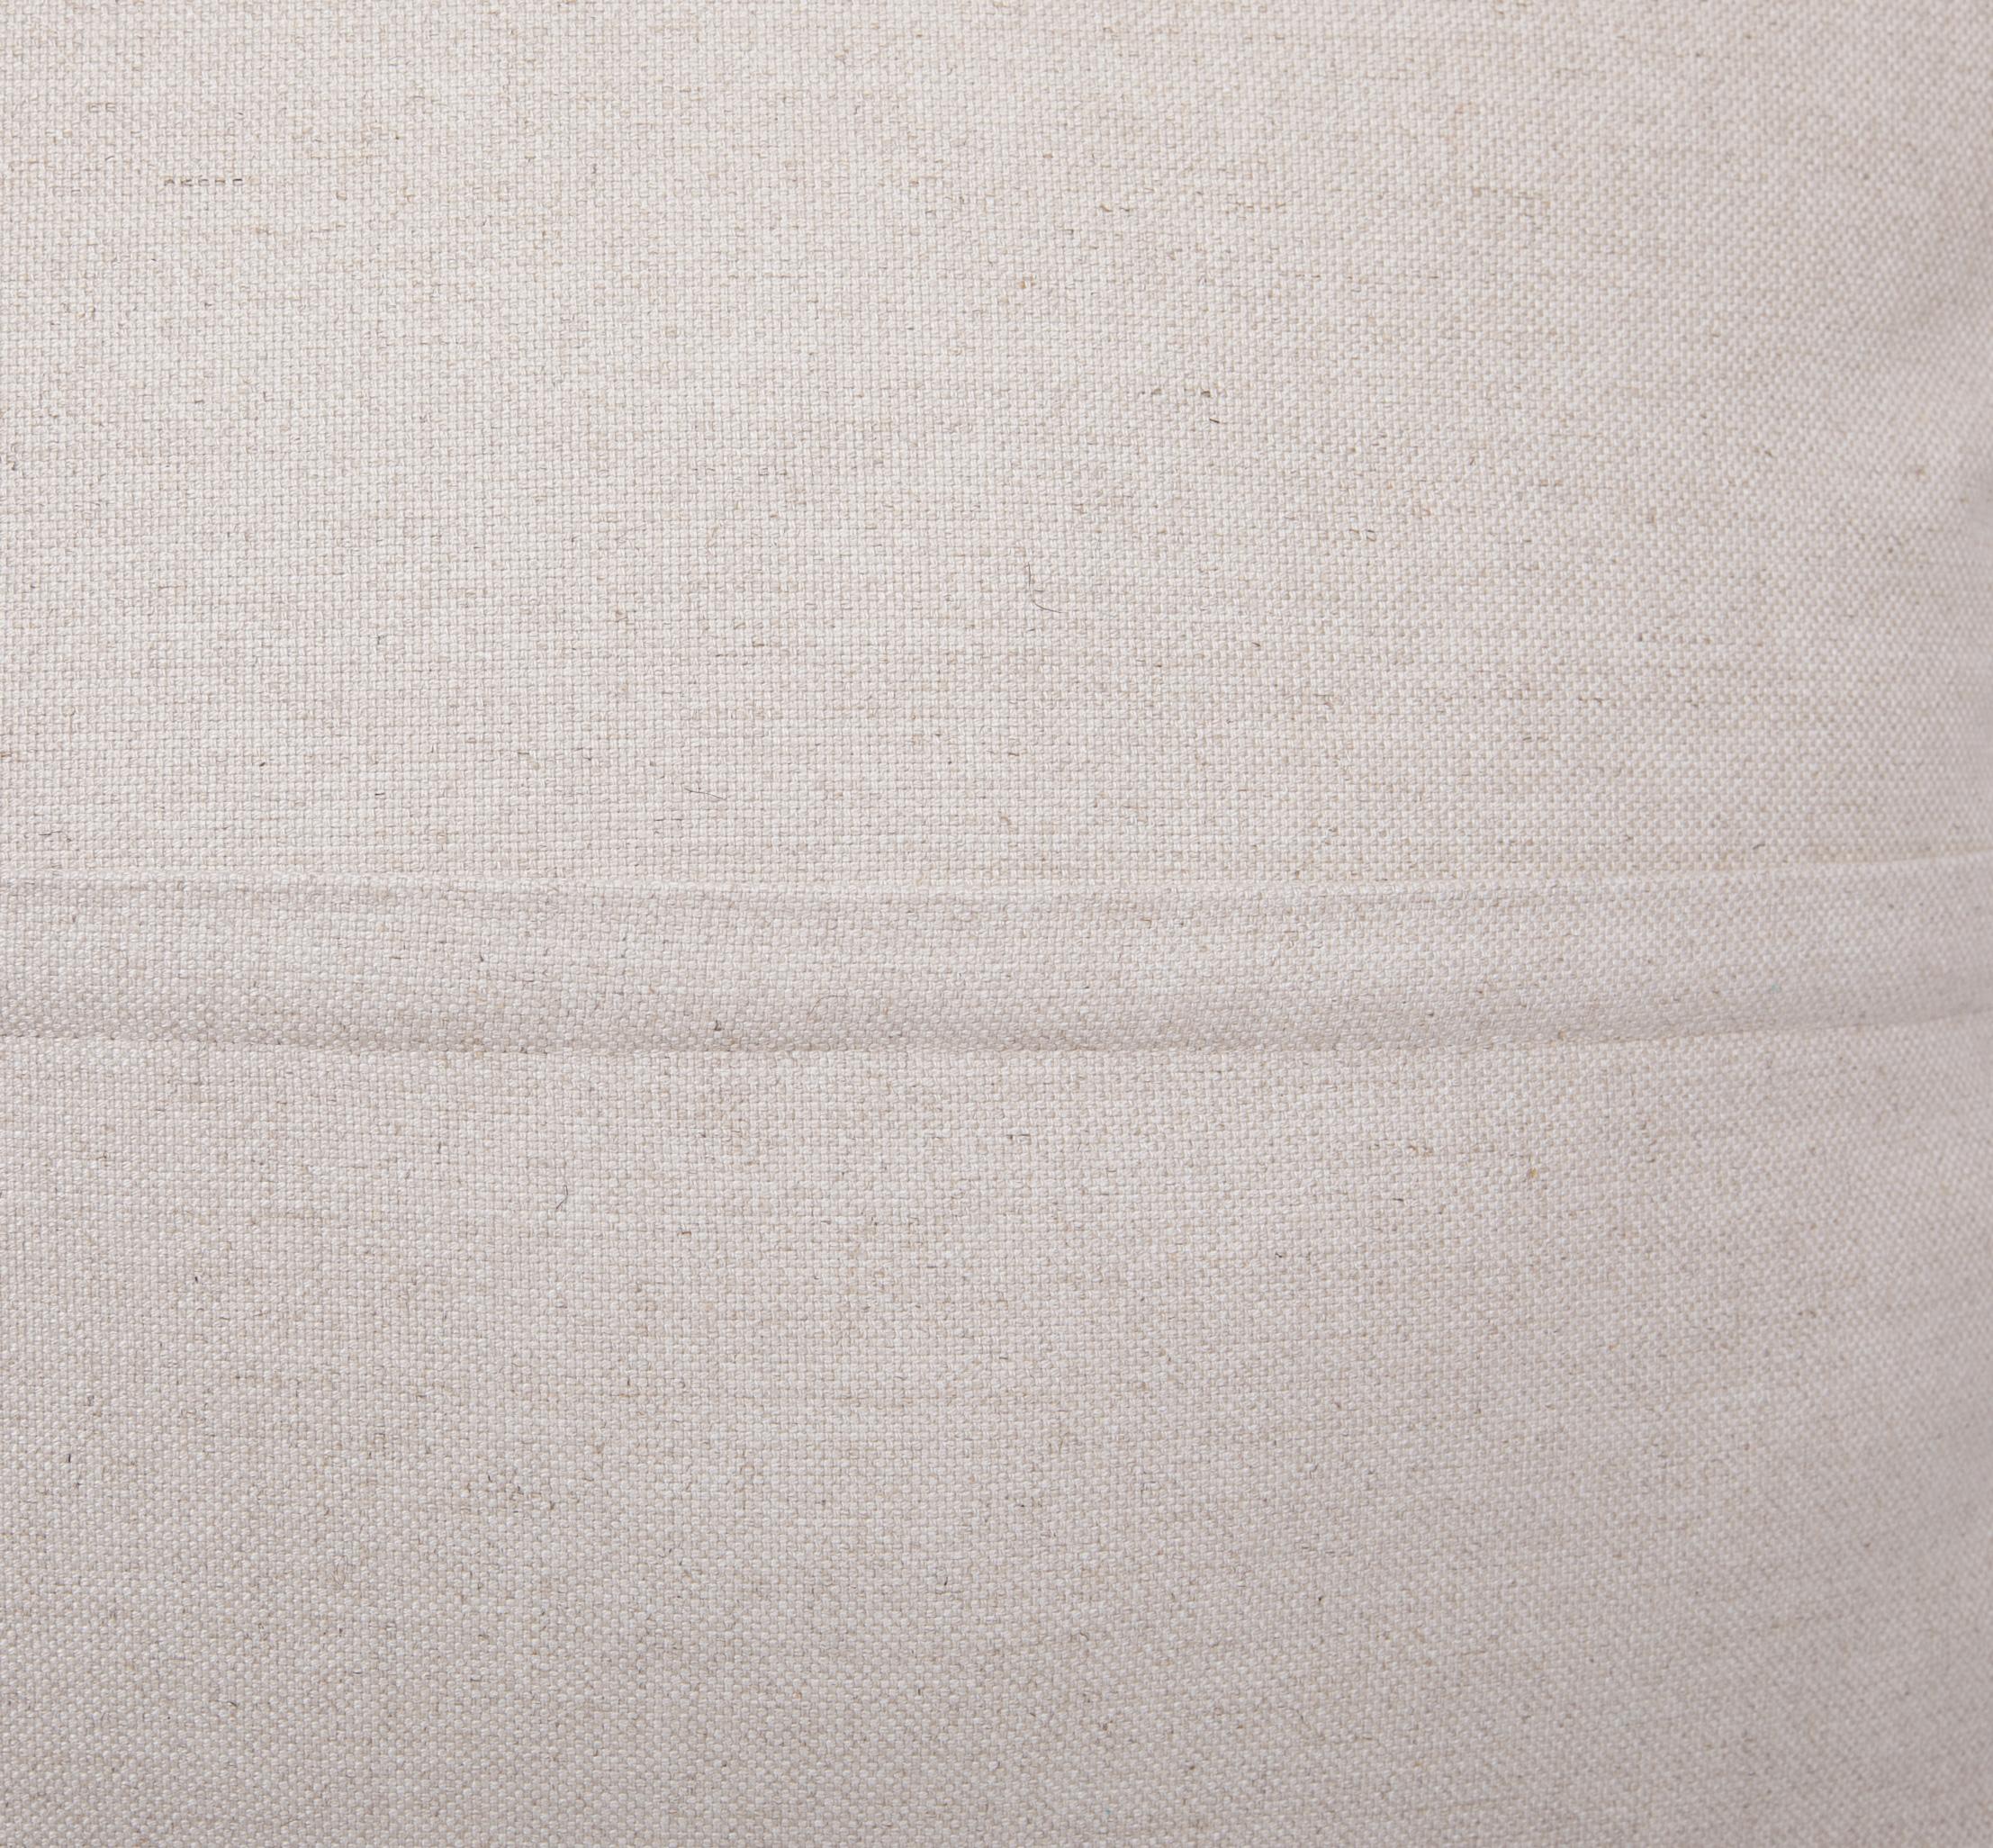 Neutral Pillowcases Made from an Anatolian Vintage Cover, Mid-20th Century 2